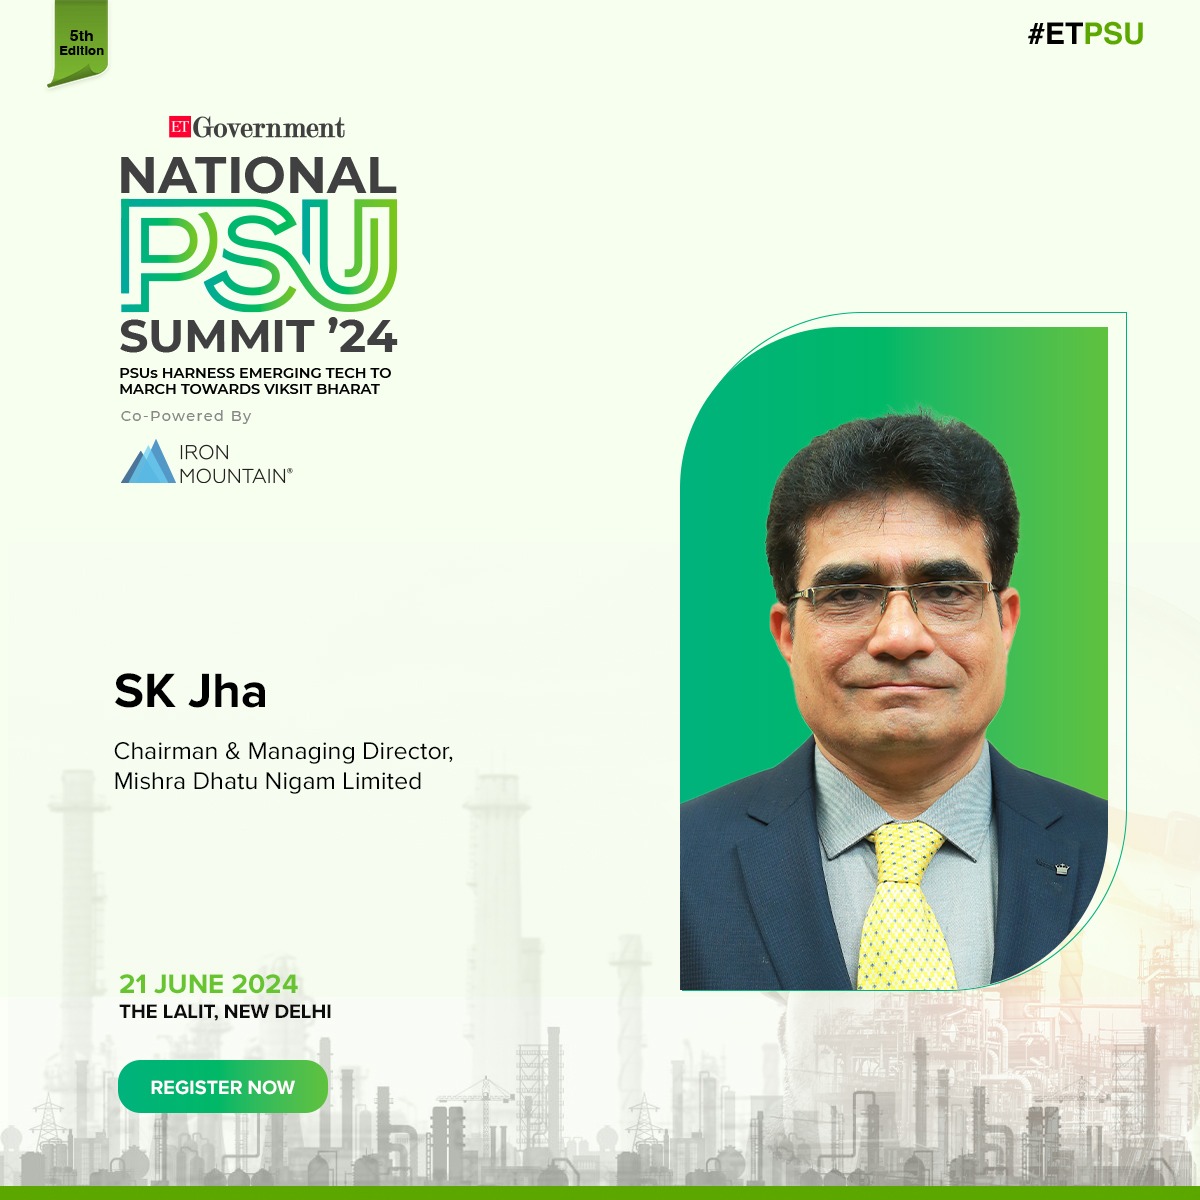 Excited to welcome @CMD_MIDHANI, Chairman & Managing Director of @MidhaniLtd, as our distinguished Speaker for the ET Government National PSU Summit 2024! 

Express Interest: zurl.co/sKWP

#ETGovernment #ETPSU #DigitalTransformation #InnovationNation #TechLeadership